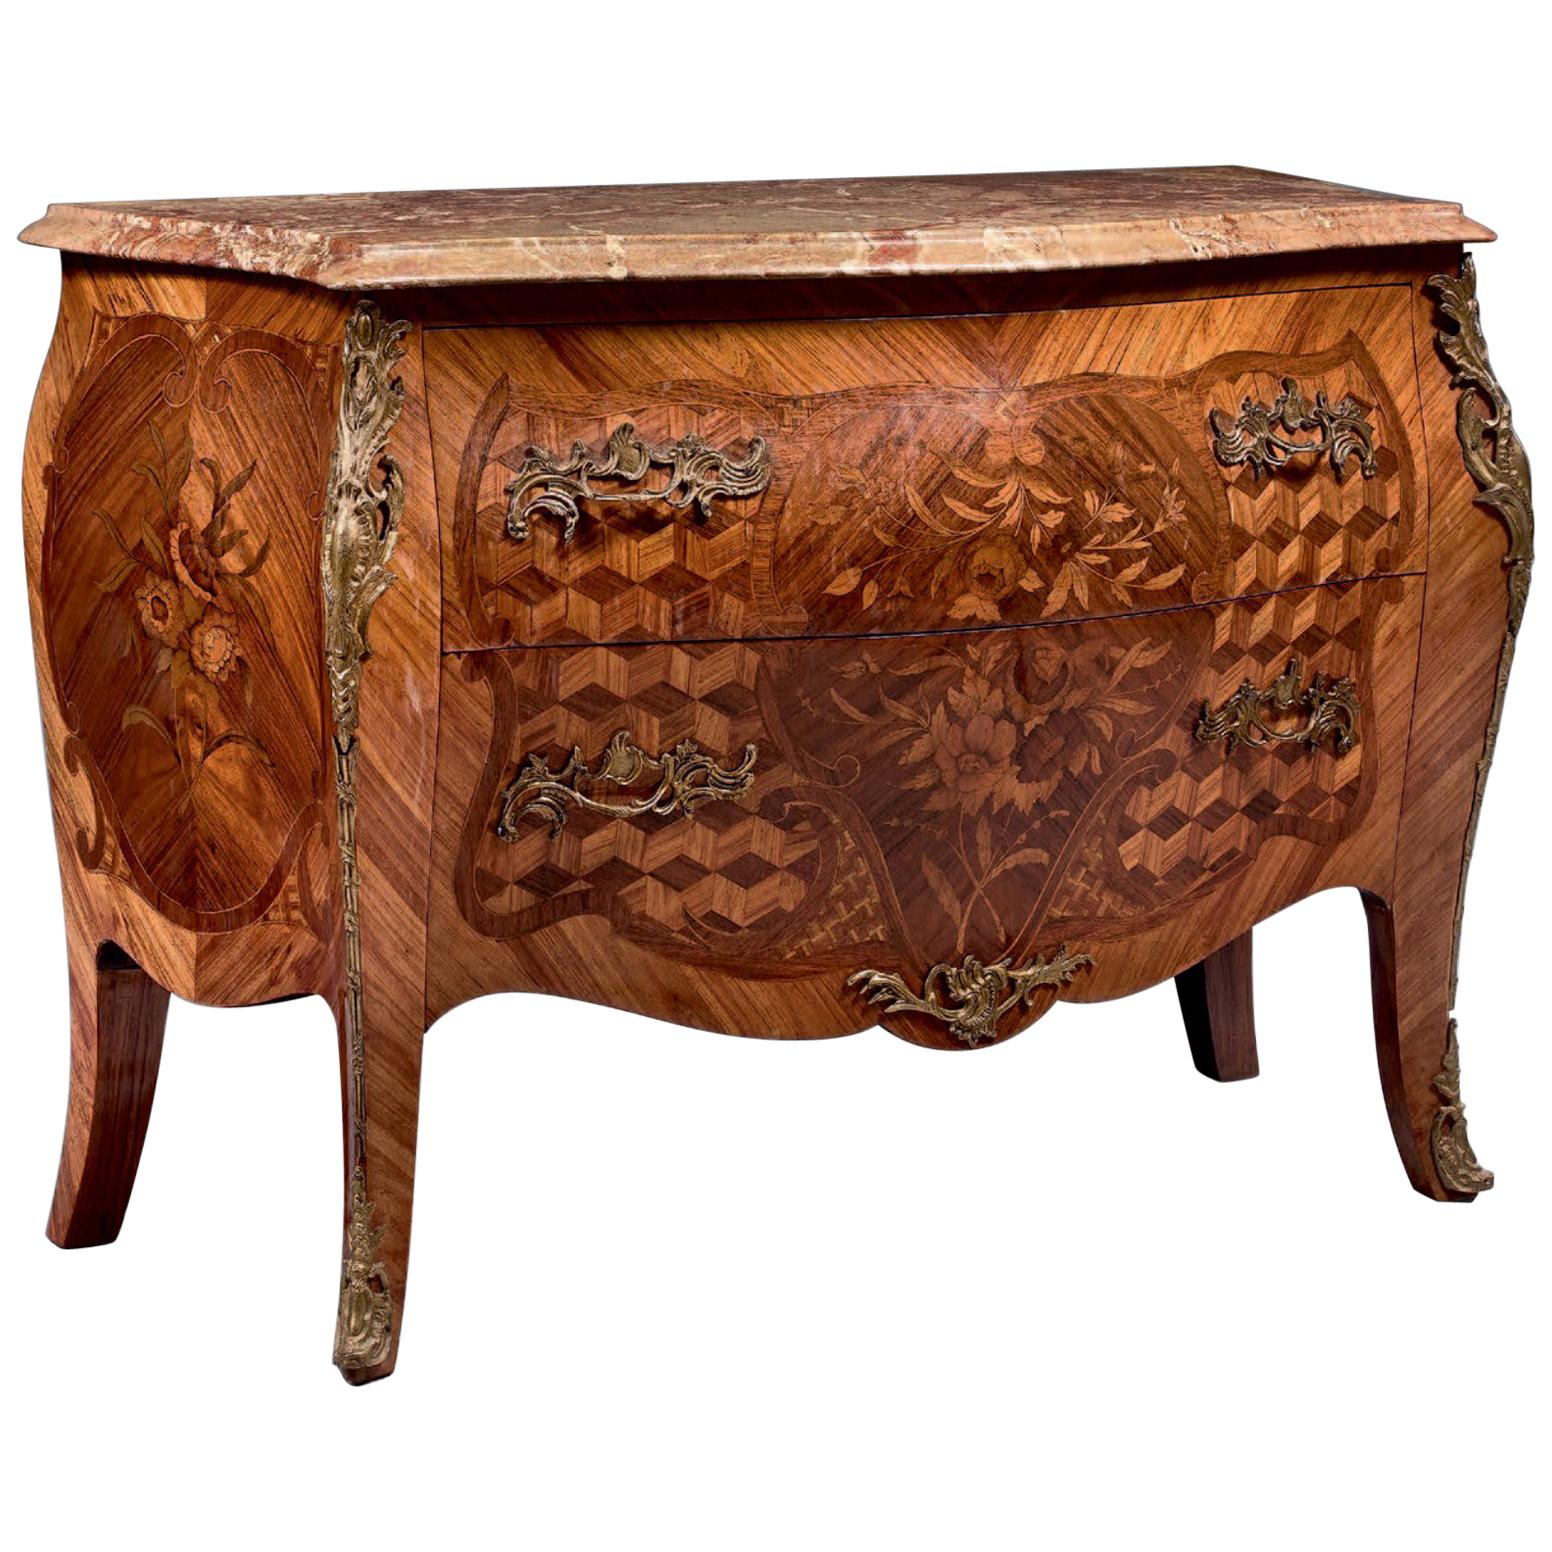 19th Century French Inlaid Two Drawers Rosewood Commode in Louis XV Style